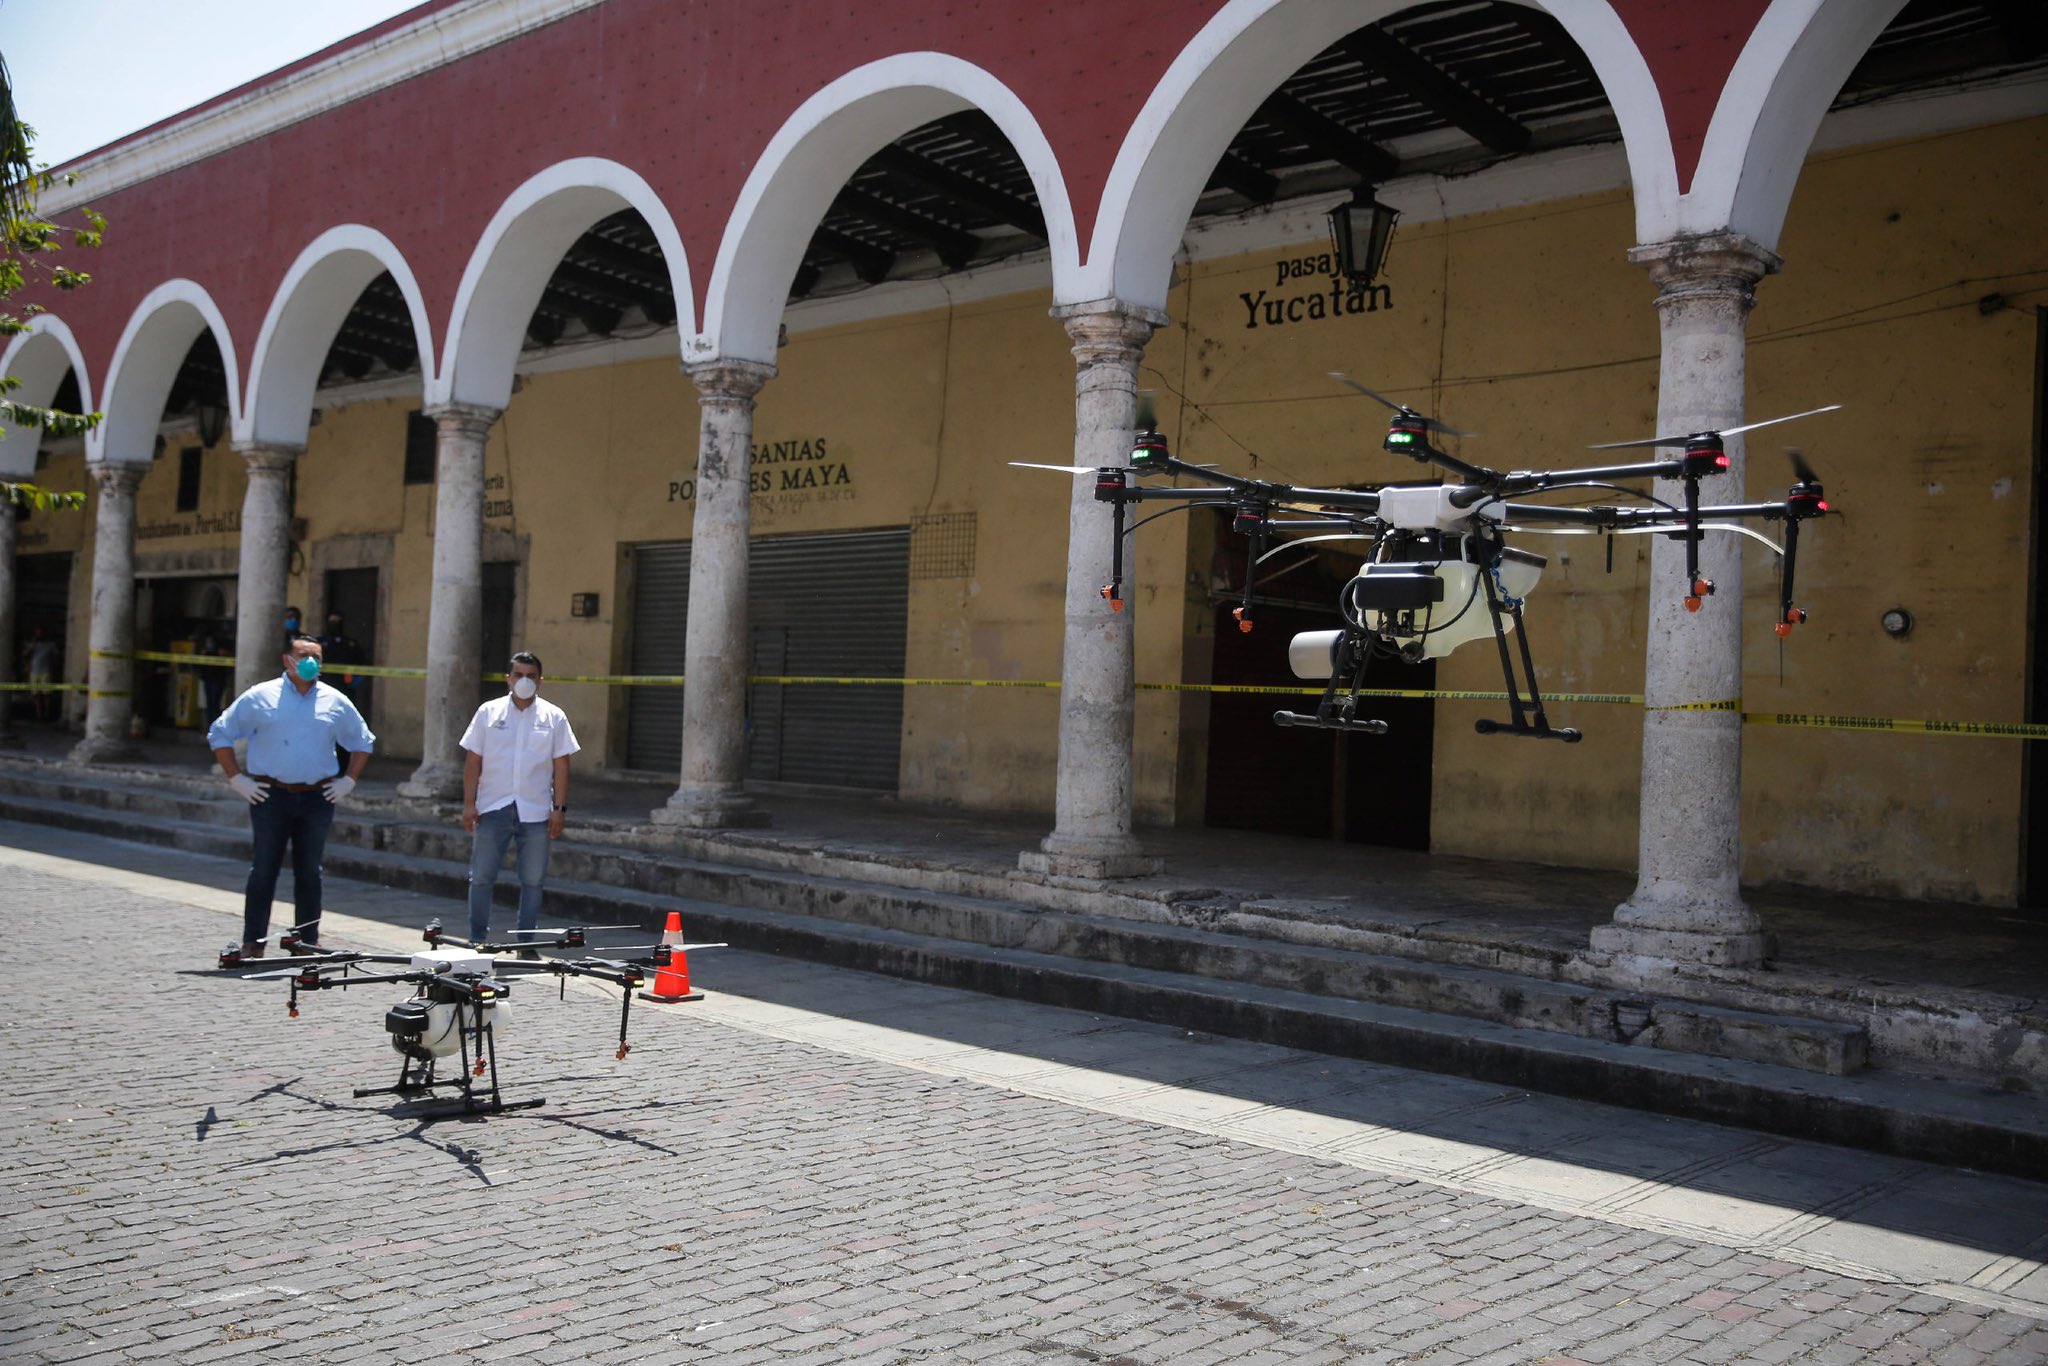 Drones are utilized in order to sanitize Merida